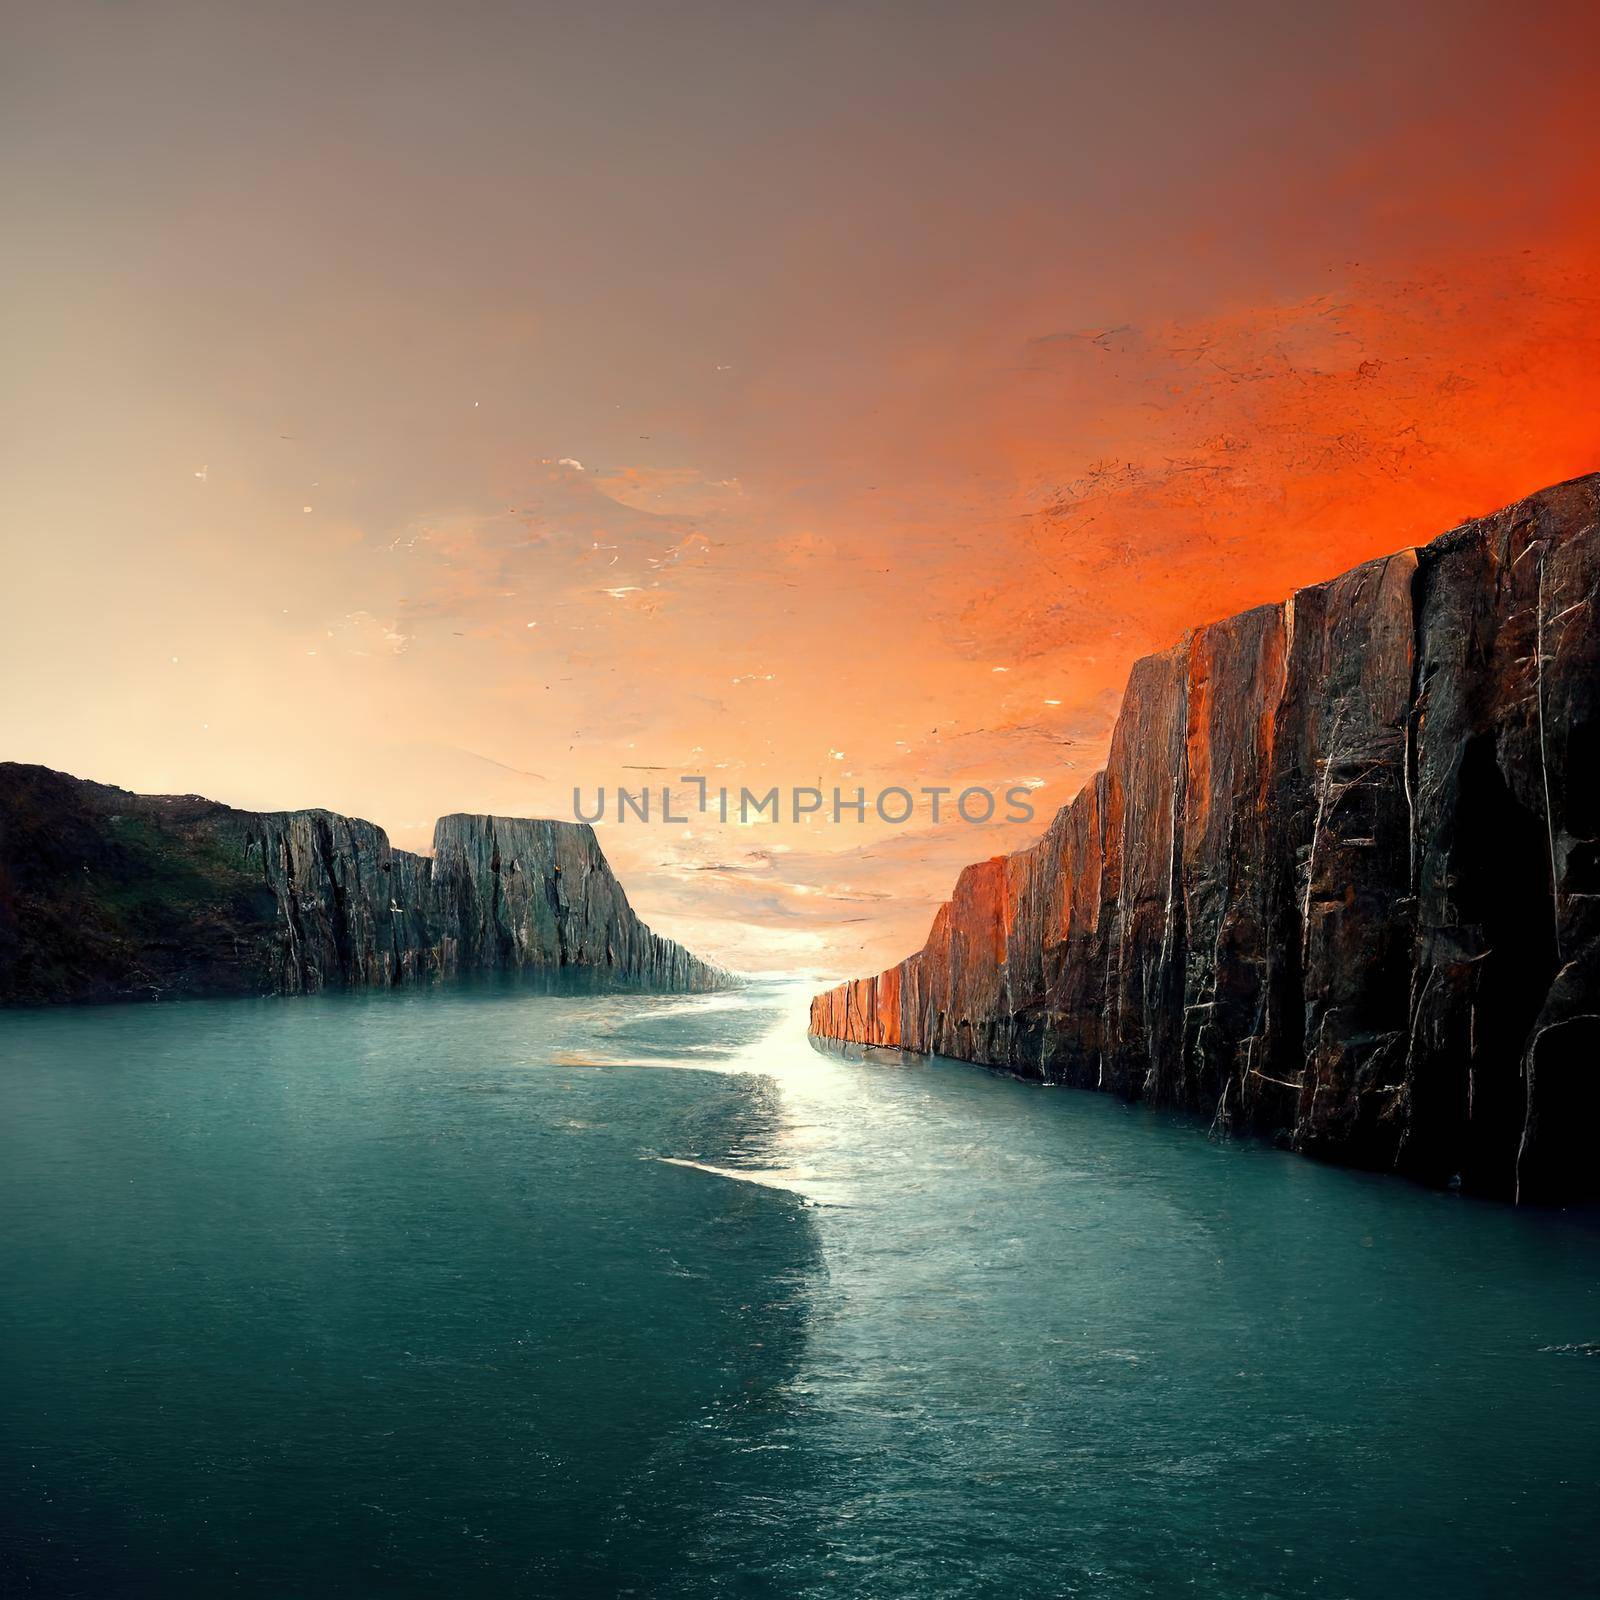 futuristic landscape with cliffs and water. Modern minimal abstract background by 2ragon